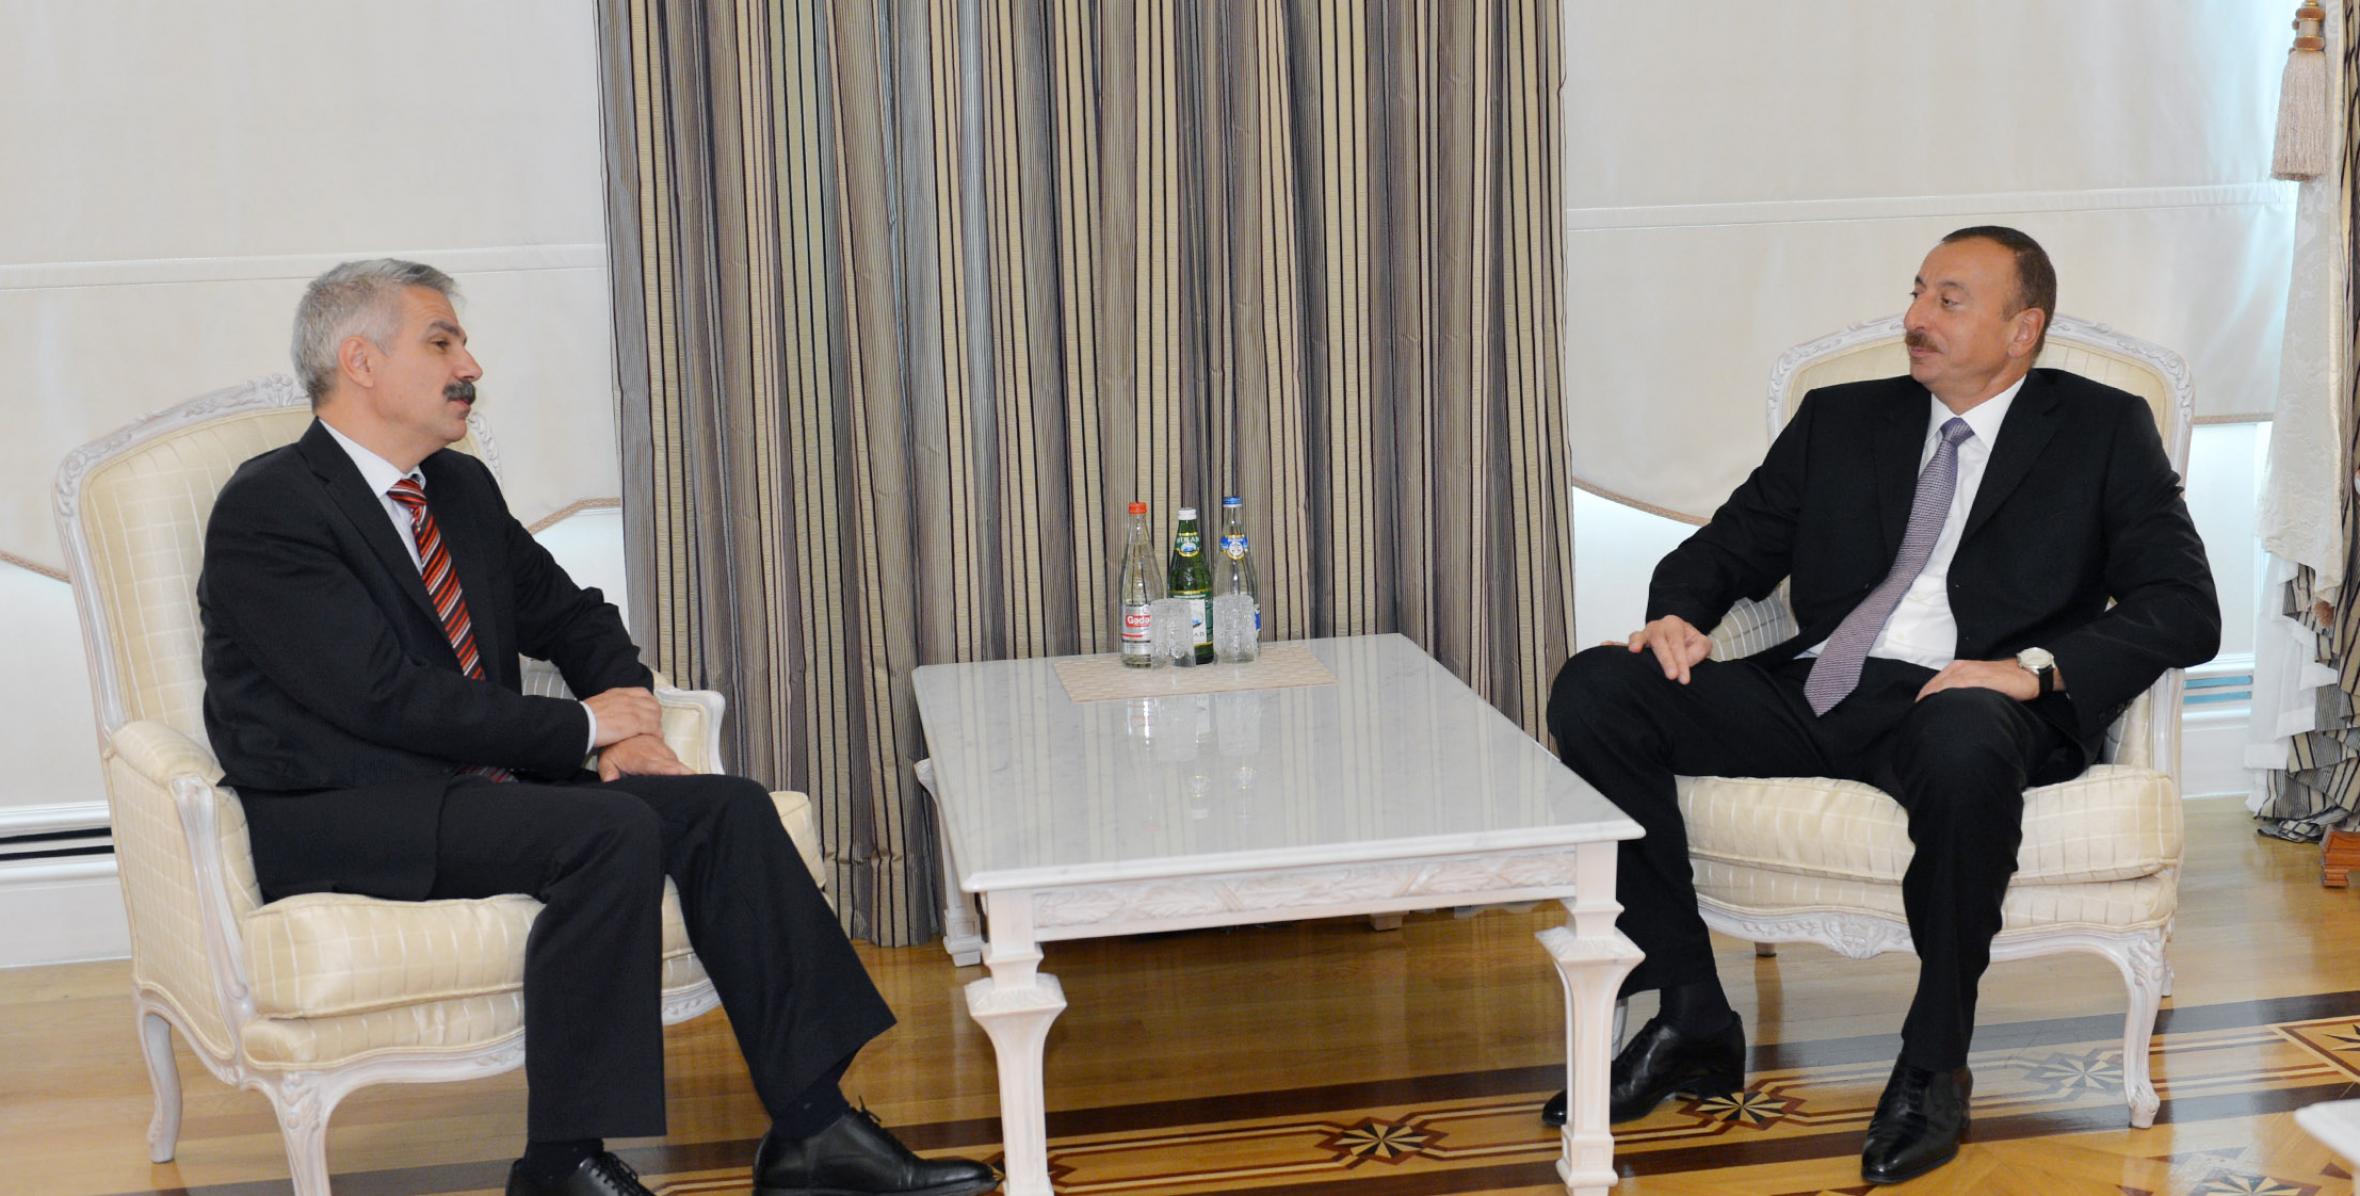 Ilham Aliyev received the Ambassador of the Kingdom of the Netherlands to Azerbaijan in connection with the completion of his diplomatic mission in the country